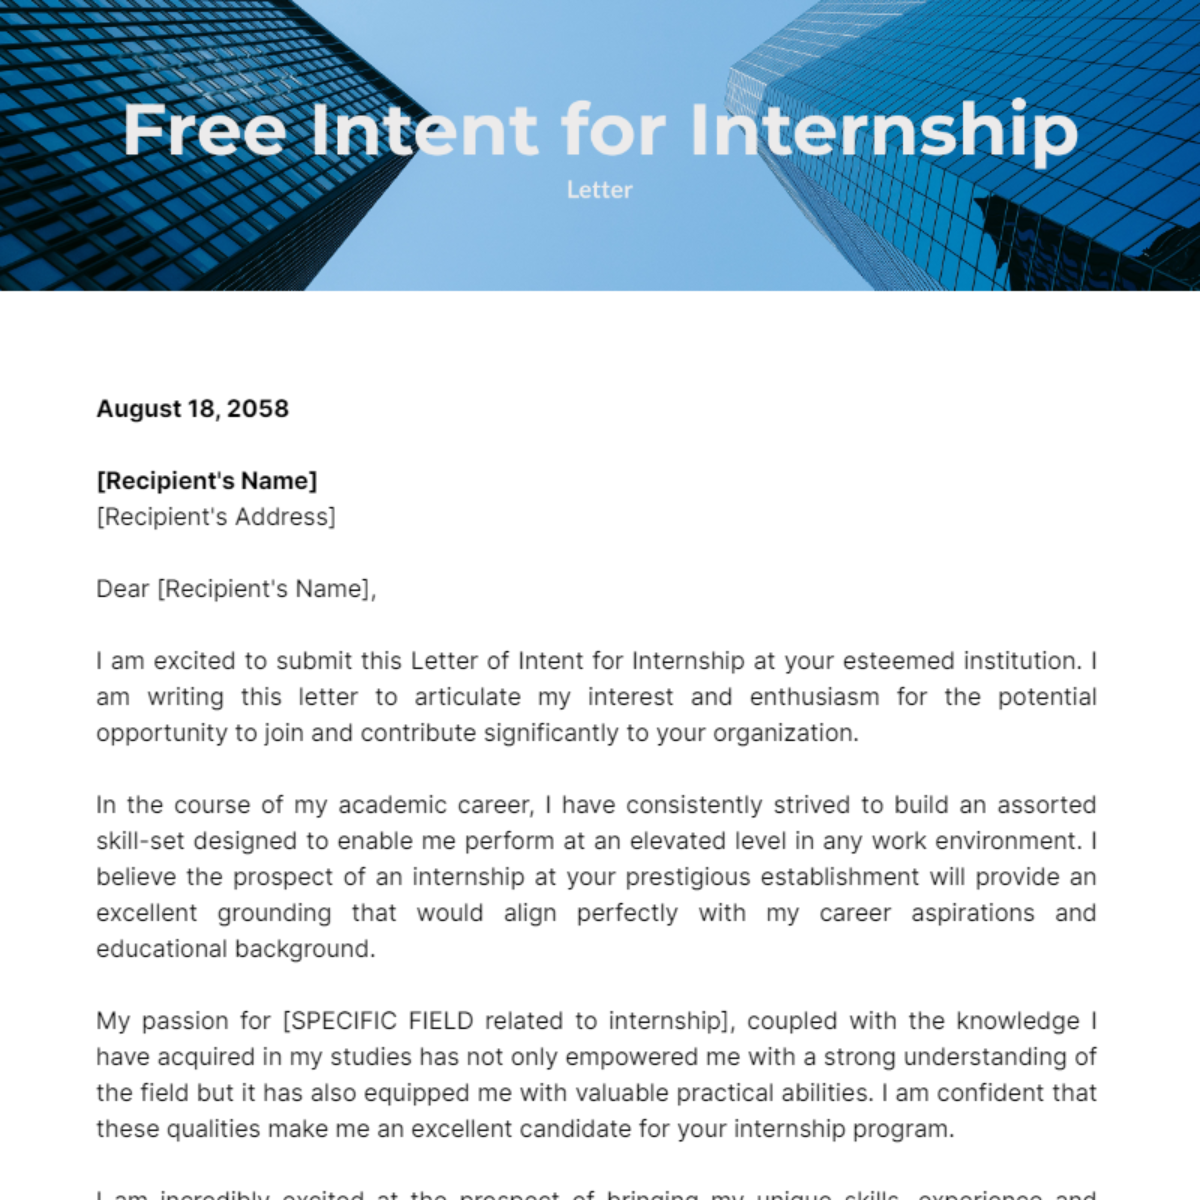 Letter of Intent for Internship Template